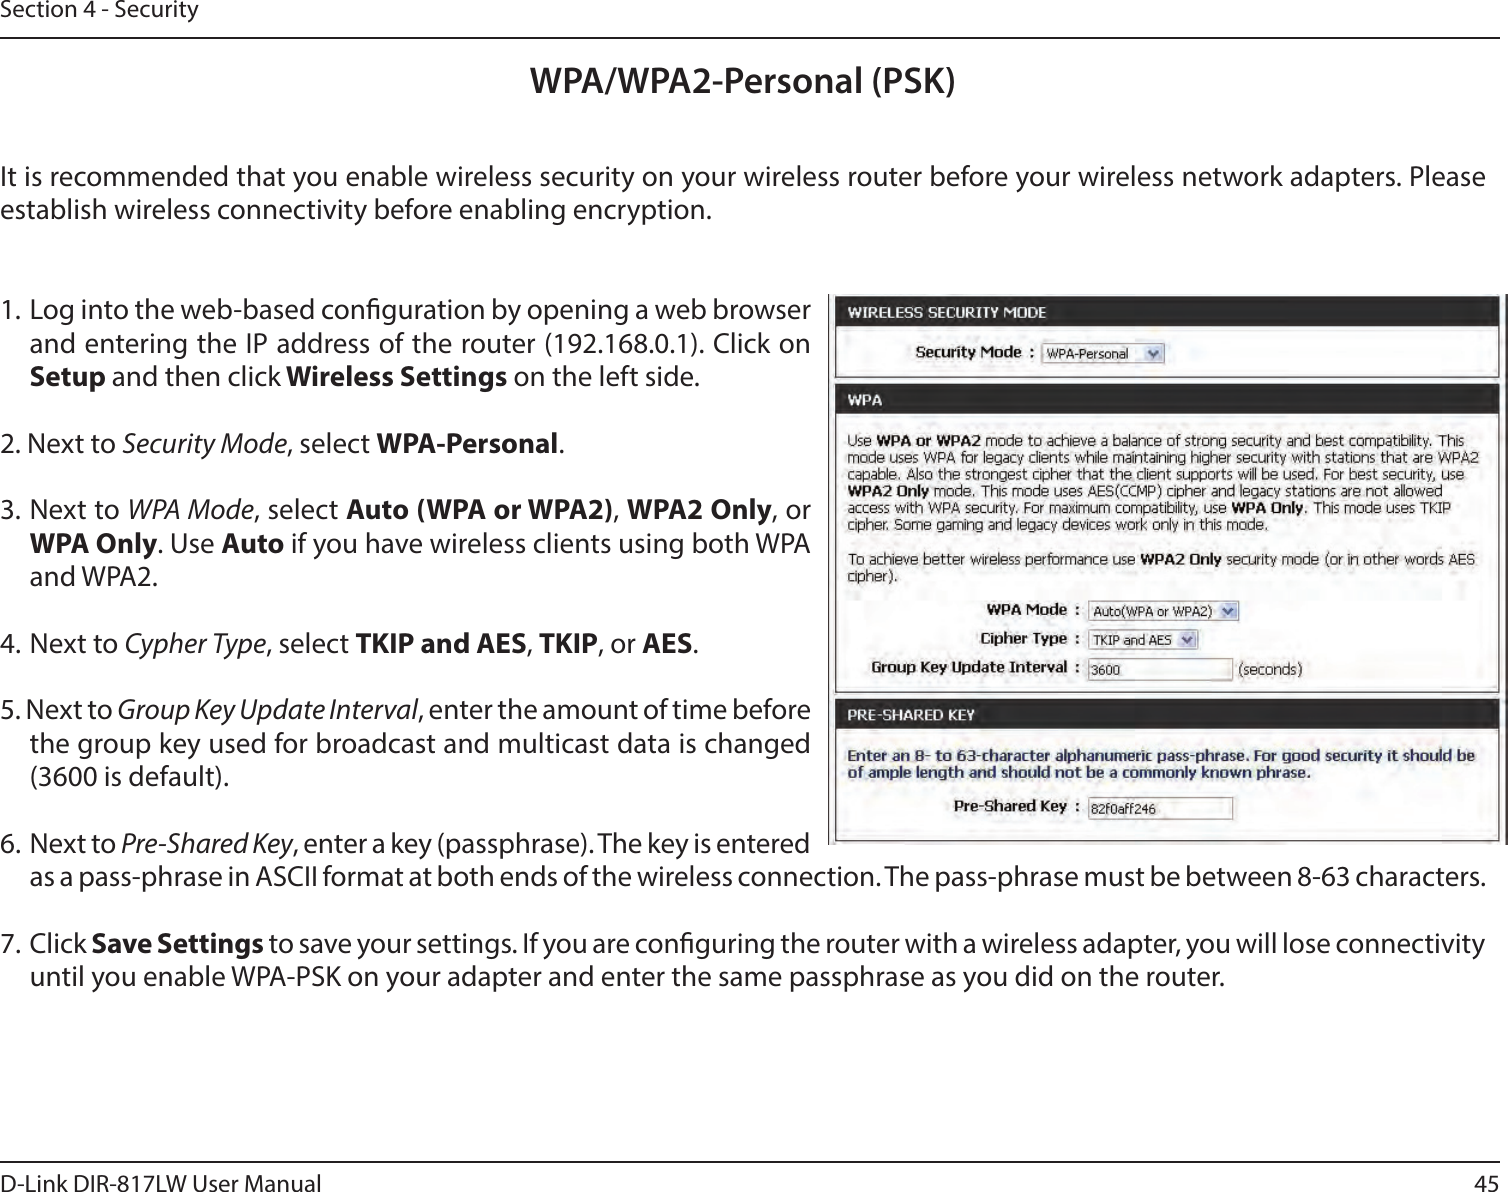 45D-Link DIR-817LW User ManualSection 4 - SecurityWPA/WPA2-Personal (PSK)It is recommended that you enable wireless security on your wireless router before your wireless network adapters. Please establish wireless connectivity before enabling encryption.1. Log into the web-based conguration by opening a web browser and entering the IP address of the router (192.168.0.1). Click on Setup and then click Wireless Settings on the left side.2. Next to Security Mode, select WPA-Personal.3. Next to WPA Mode, select Auto (WPA or WPA2), WPA2 Only, or WPA Only. Use Auto if you have wireless clients using both WPA and WPA2.4. Next to Cypher Type, select TKIP and AES, TKIP, or AES.5. Next to Group Key Update Interval, enter the amount of time before the group key used for broadcast and multicast data is changed (3600 is default).6. Next to Pre-Shared Key, enter a key (passphrase). The key is entered as a pass-phrase in ASCII format at both ends of the wireless connection. The pass-phrase must be between 8-63 characters. 7. Click Save Settings to save your settings. If you are conguring the router with a wireless adapter, you will lose connectivity until you enable WPA-PSK on your adapter and enter the same passphrase as you did on the router.